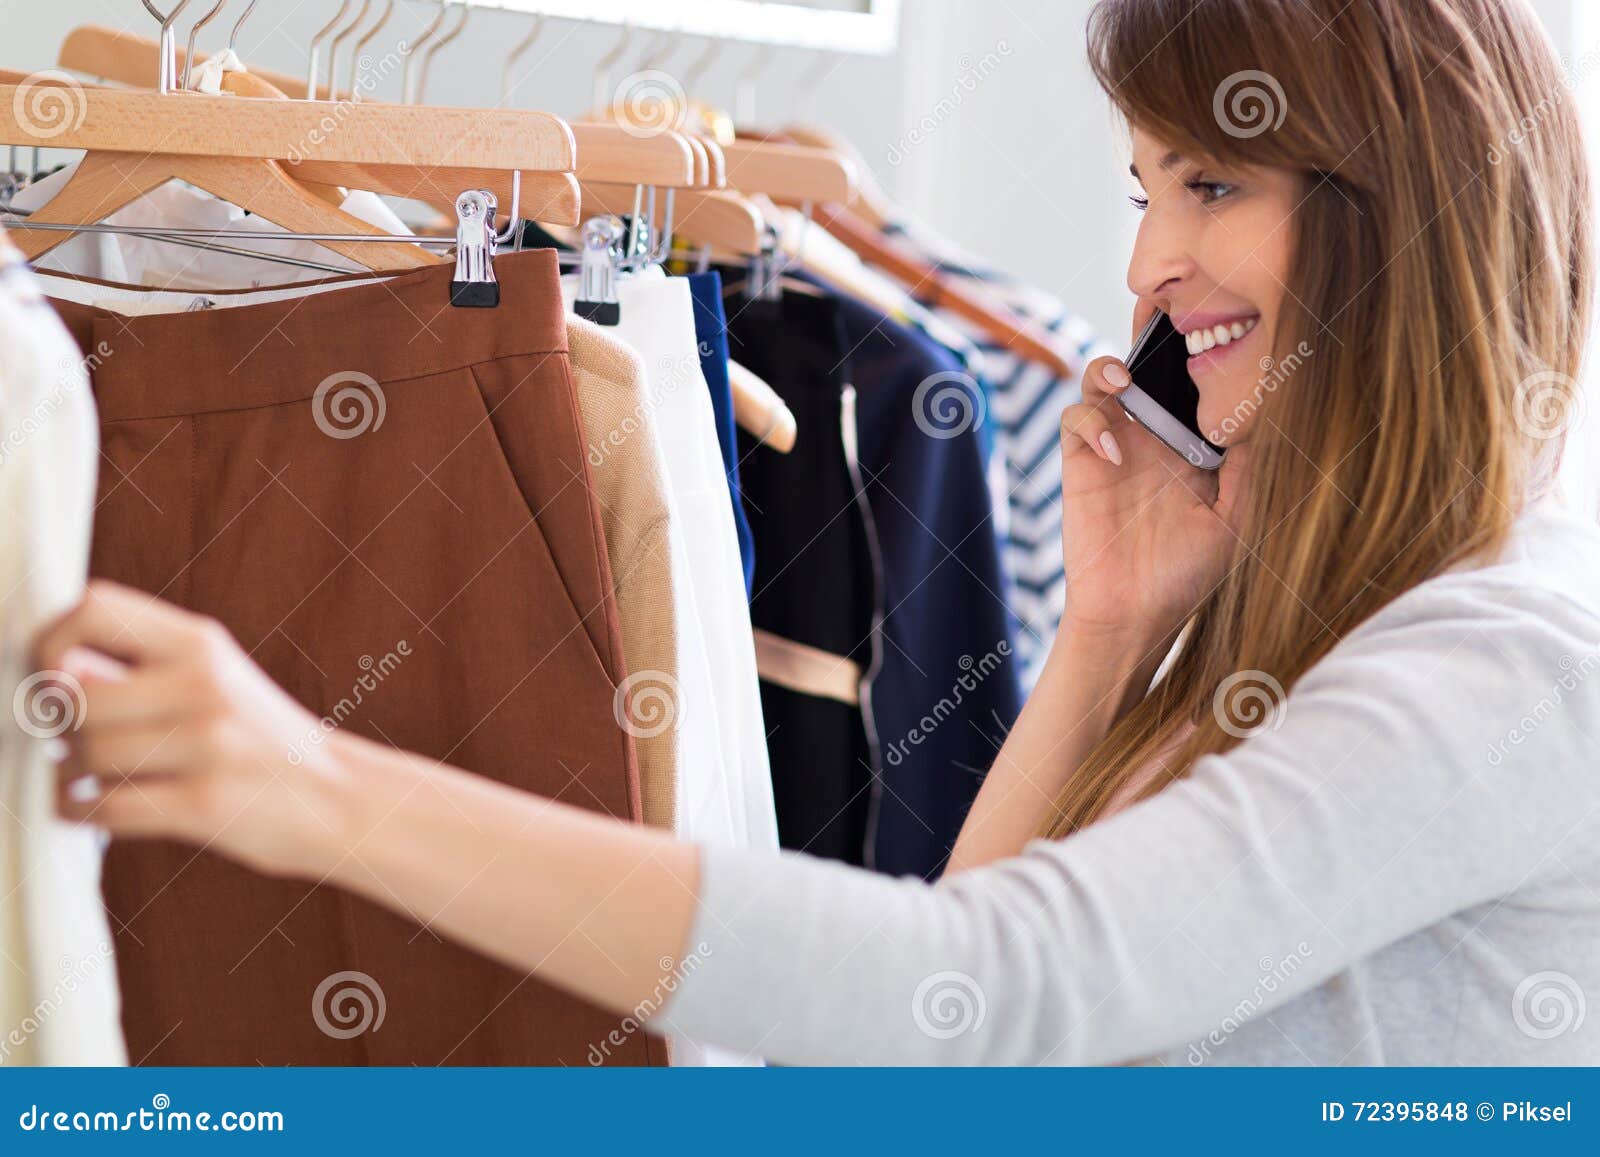 Woman Using Mobile Phone in Clothes Shop Stock Photo - Image of ...